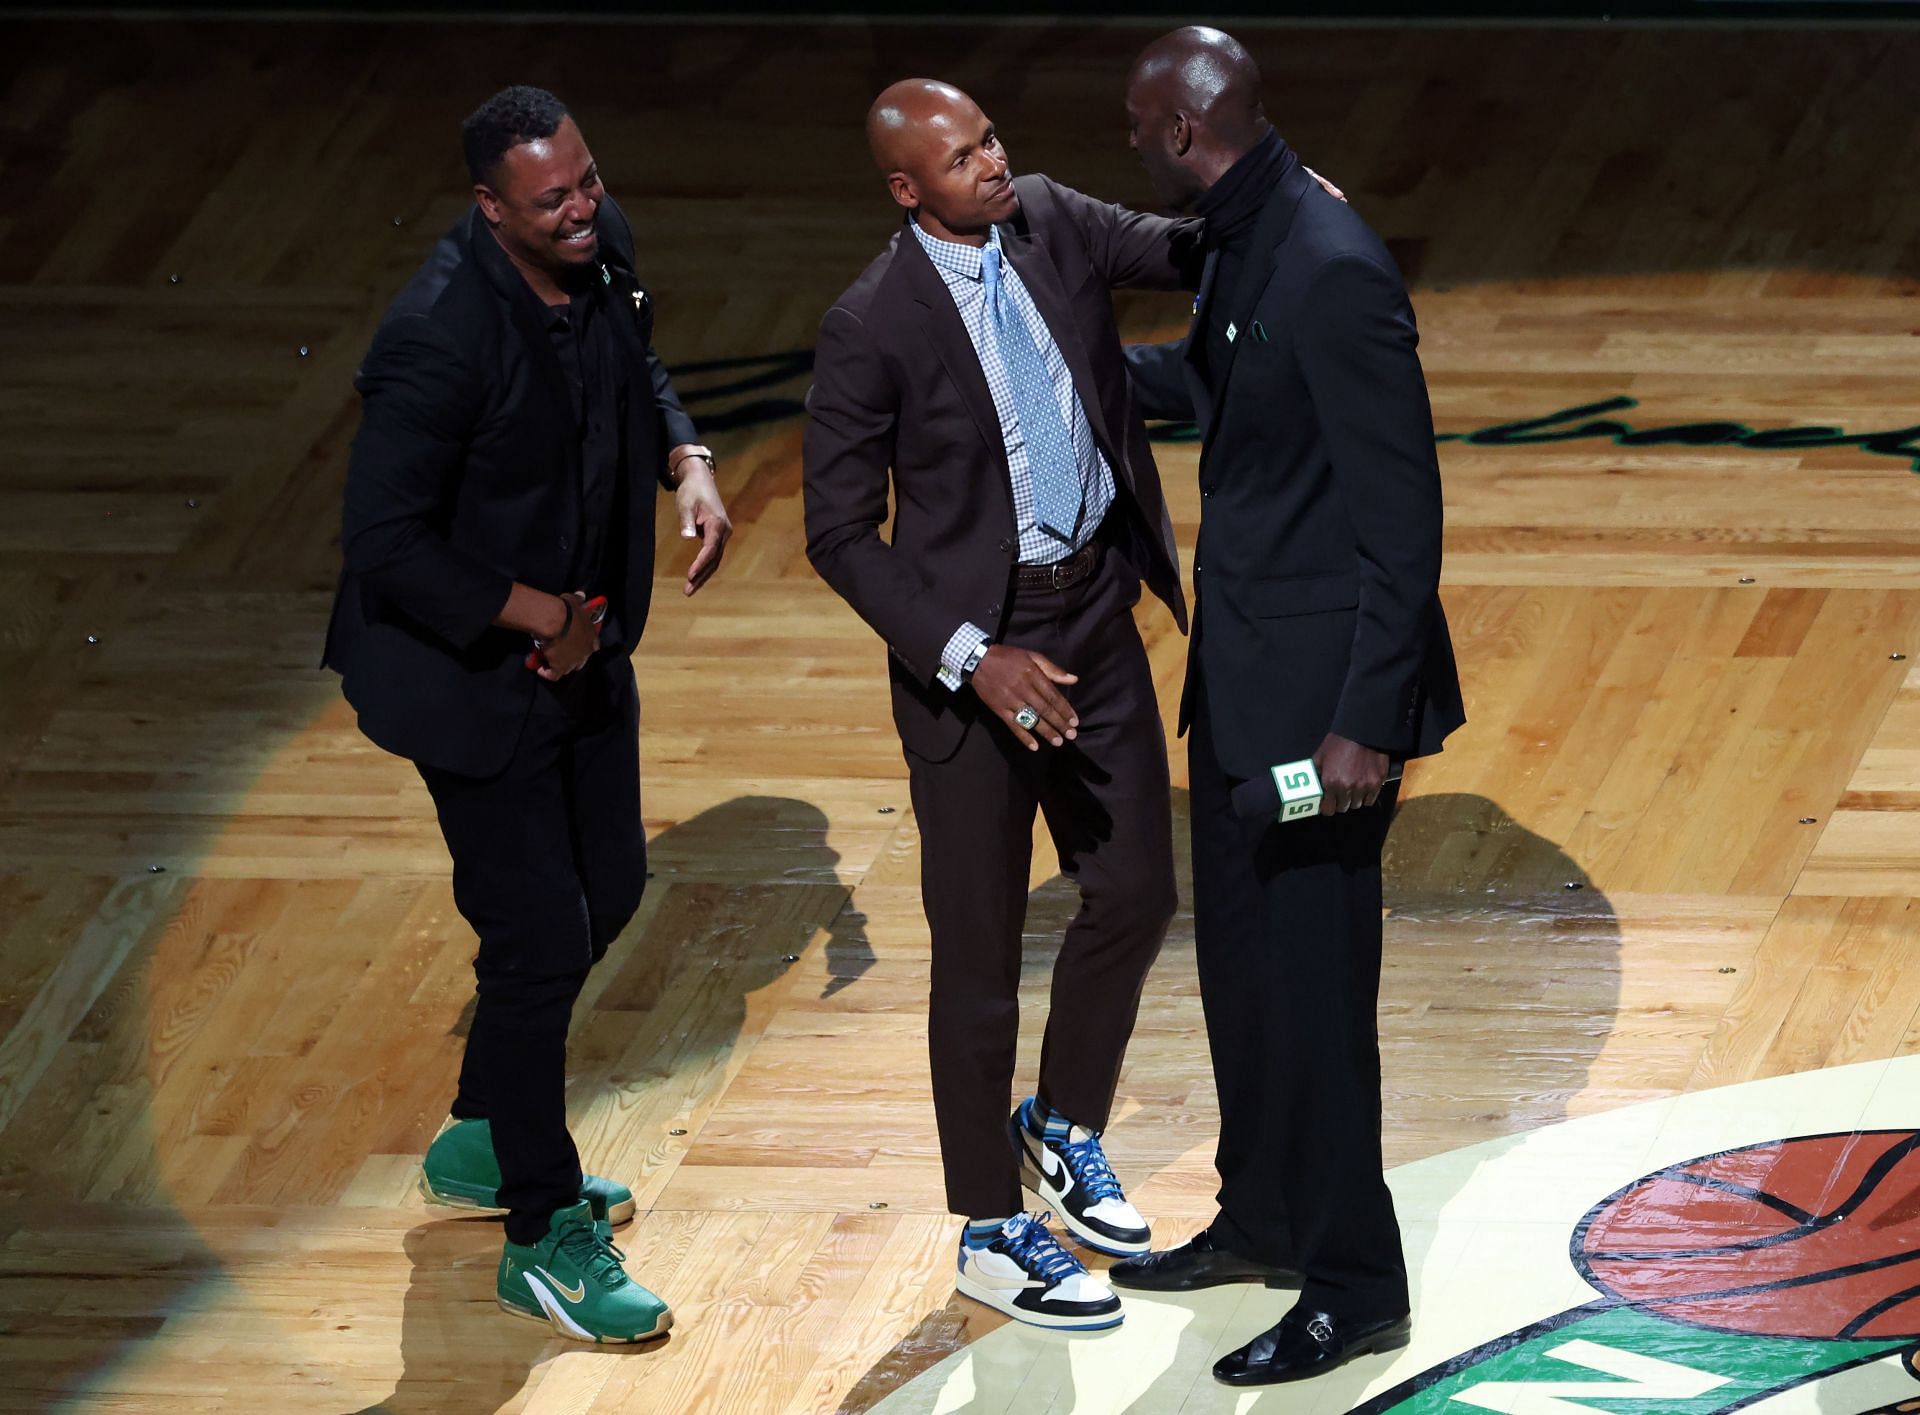 Former Boston Celtics players Paul Pierce, left, and Ray Allen, middle, hug Kevin Garnett during his number retirement ceremony following the game between the Boston Celtics and the Dallas Mavericks at TD Garden on Sunday in Boston, Massachusetts